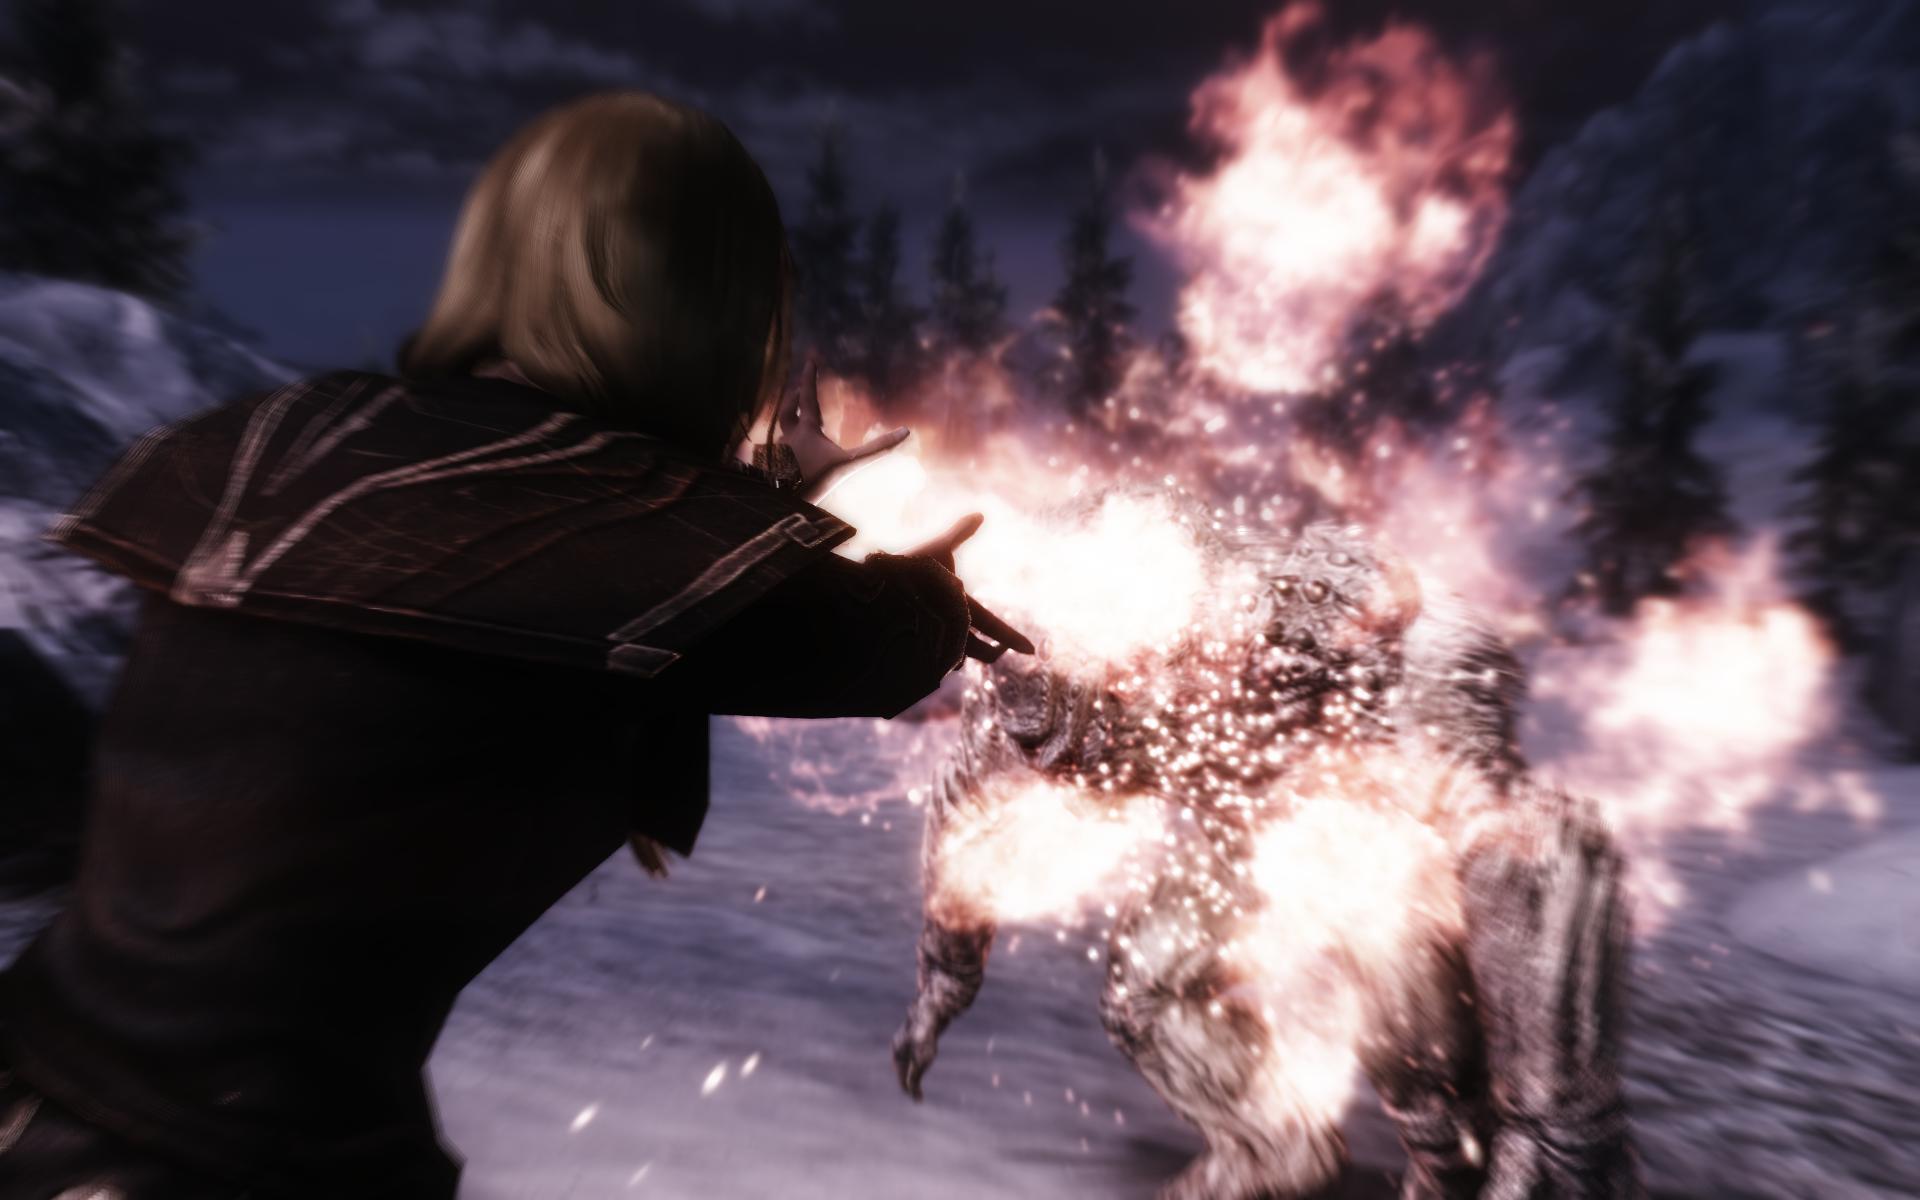 A mage character in Skyrim emits a range of flames out of her hands, setting a frost troll on fire